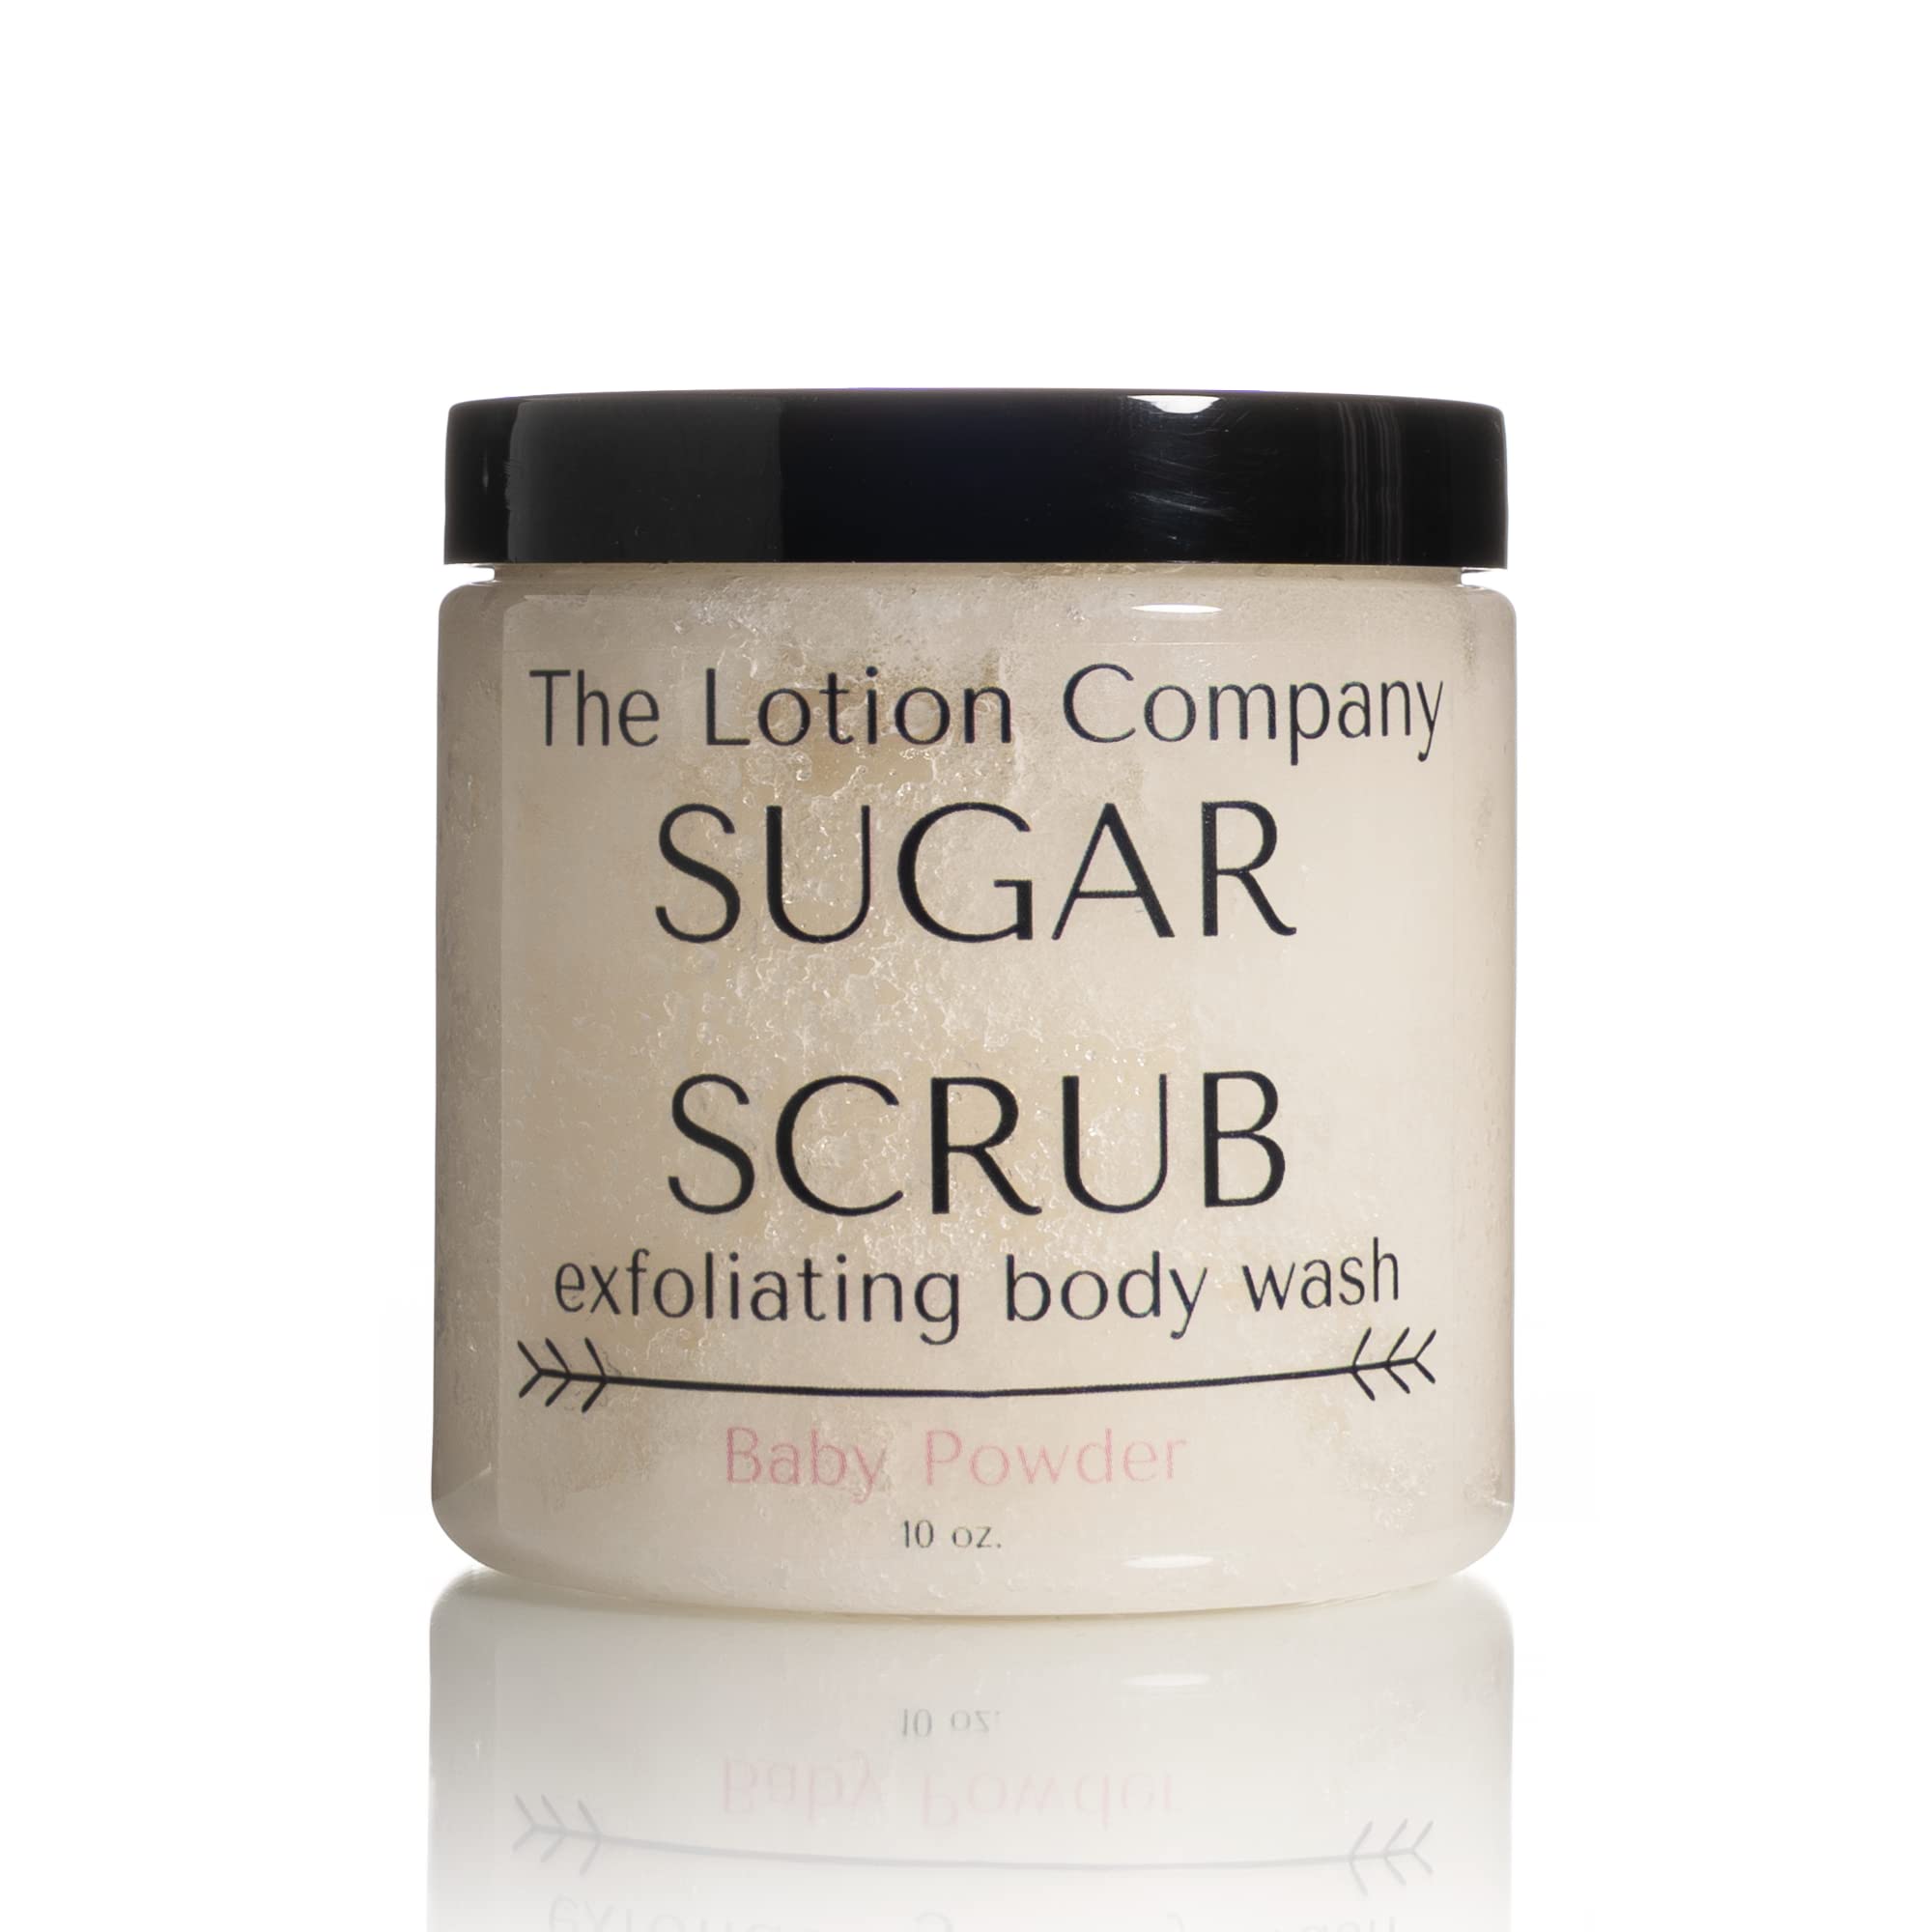 The Lotion Company Sugar Scrub Exfoliating Body Wash, Baby Powder Fragrance Scent, Paraben Free, Cruelty Free, Made in USA, Bath and shower exfoliator, 10 Ounces